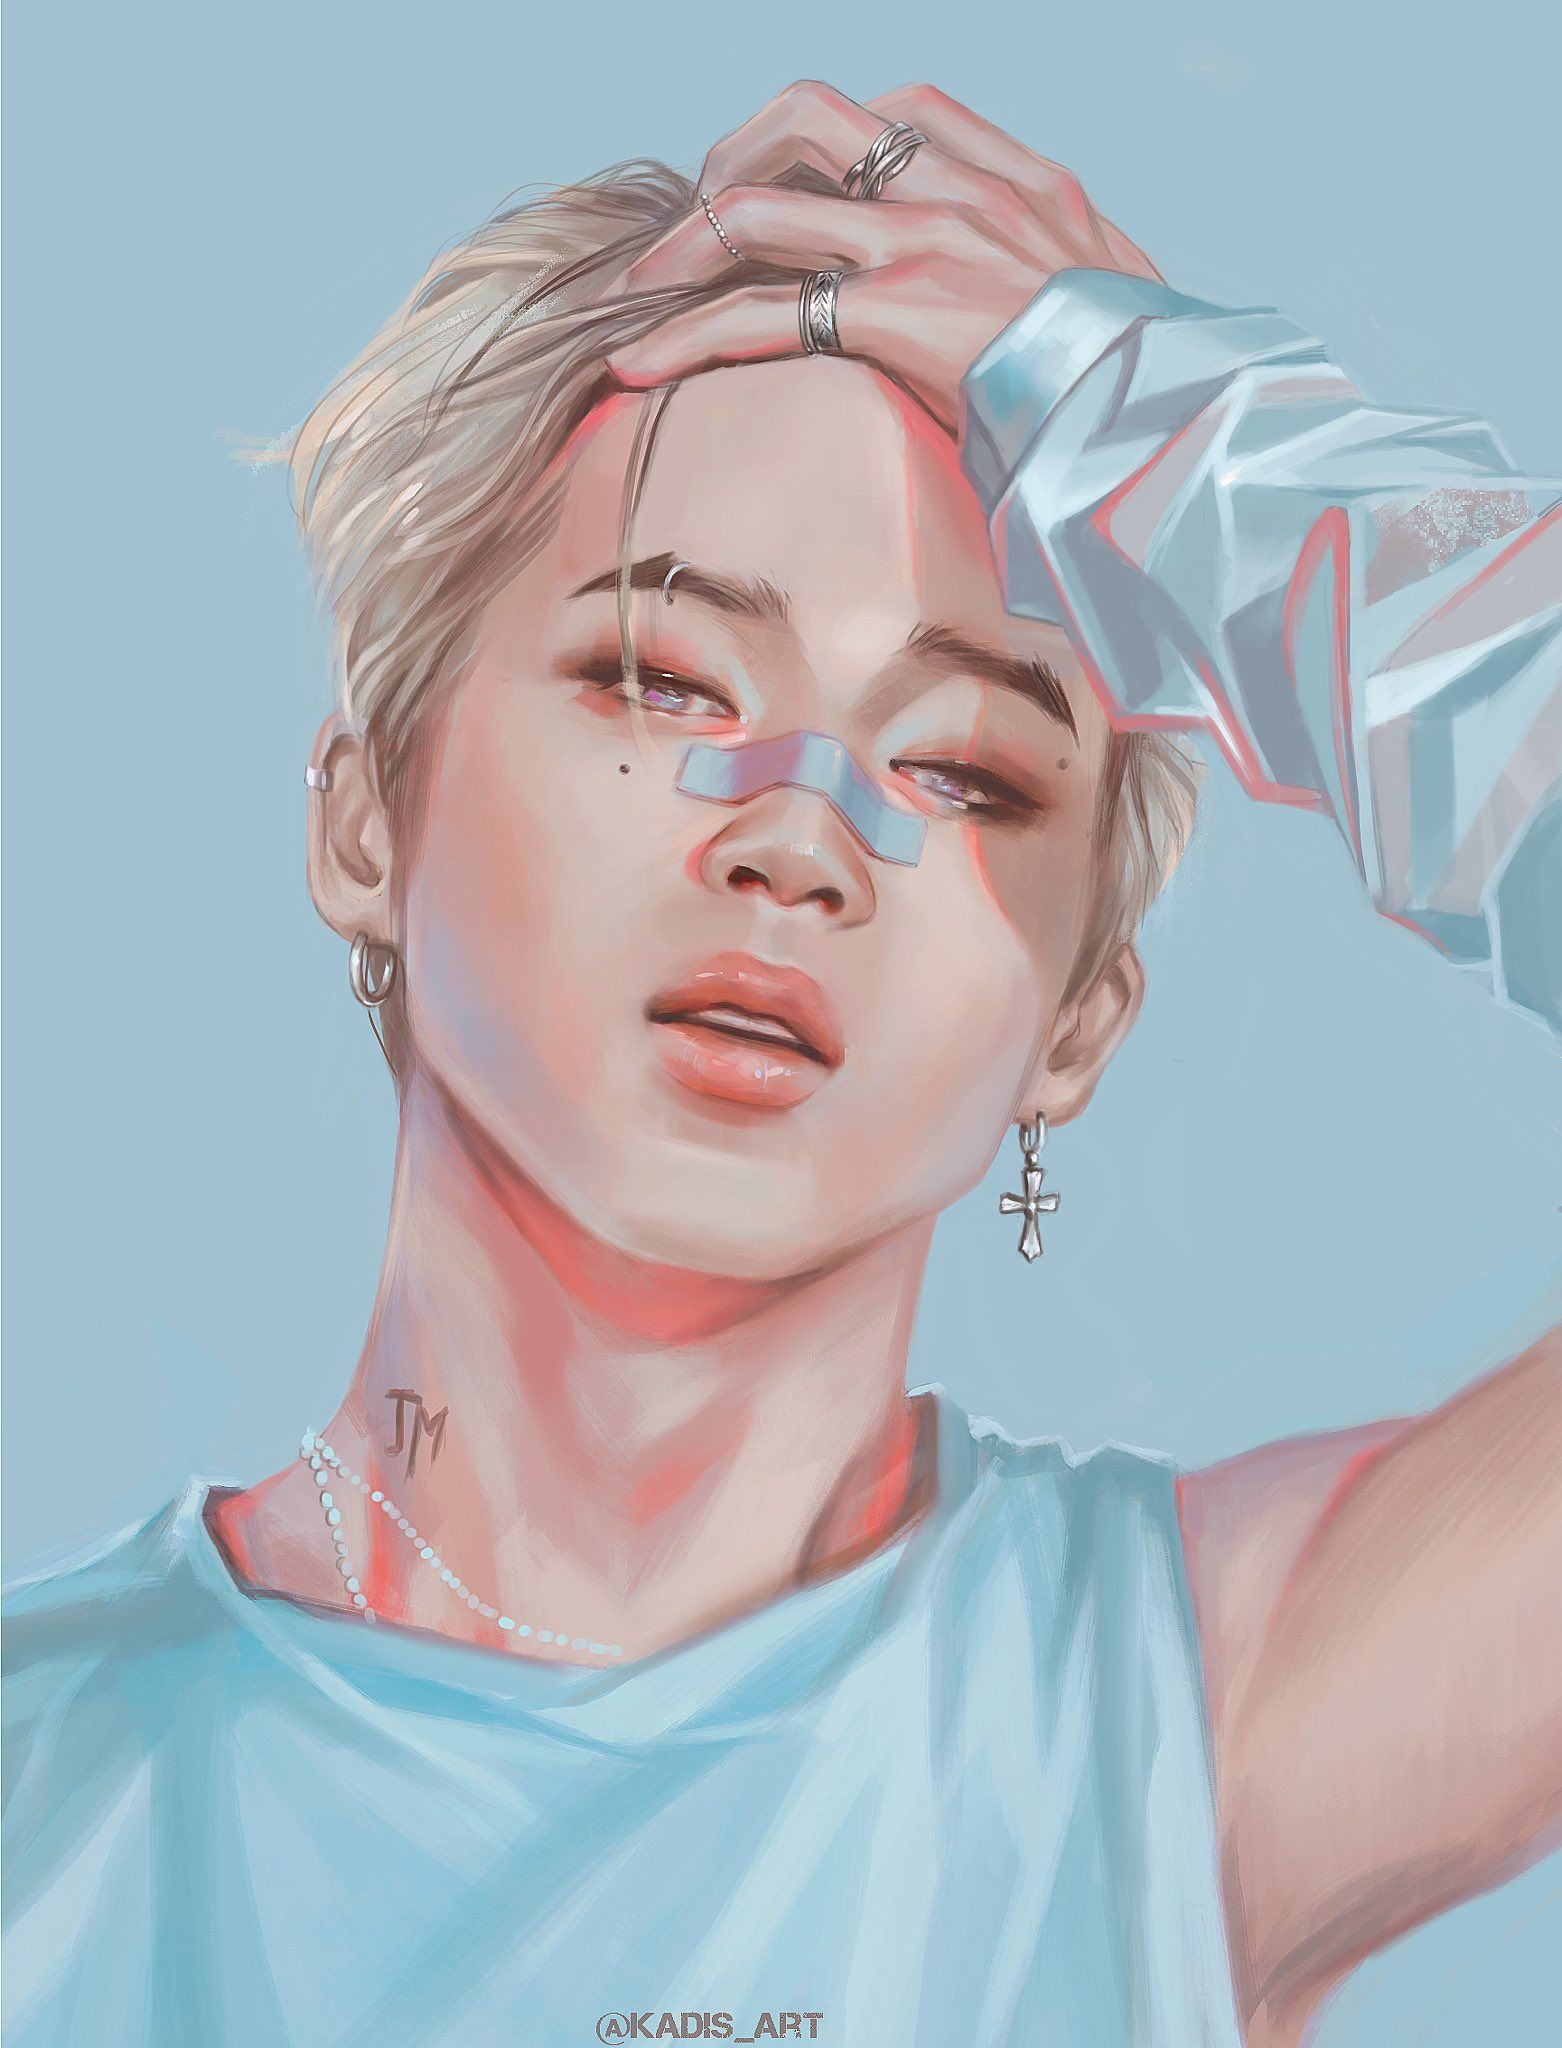 How to Draw Jimin BTS - Step by Step